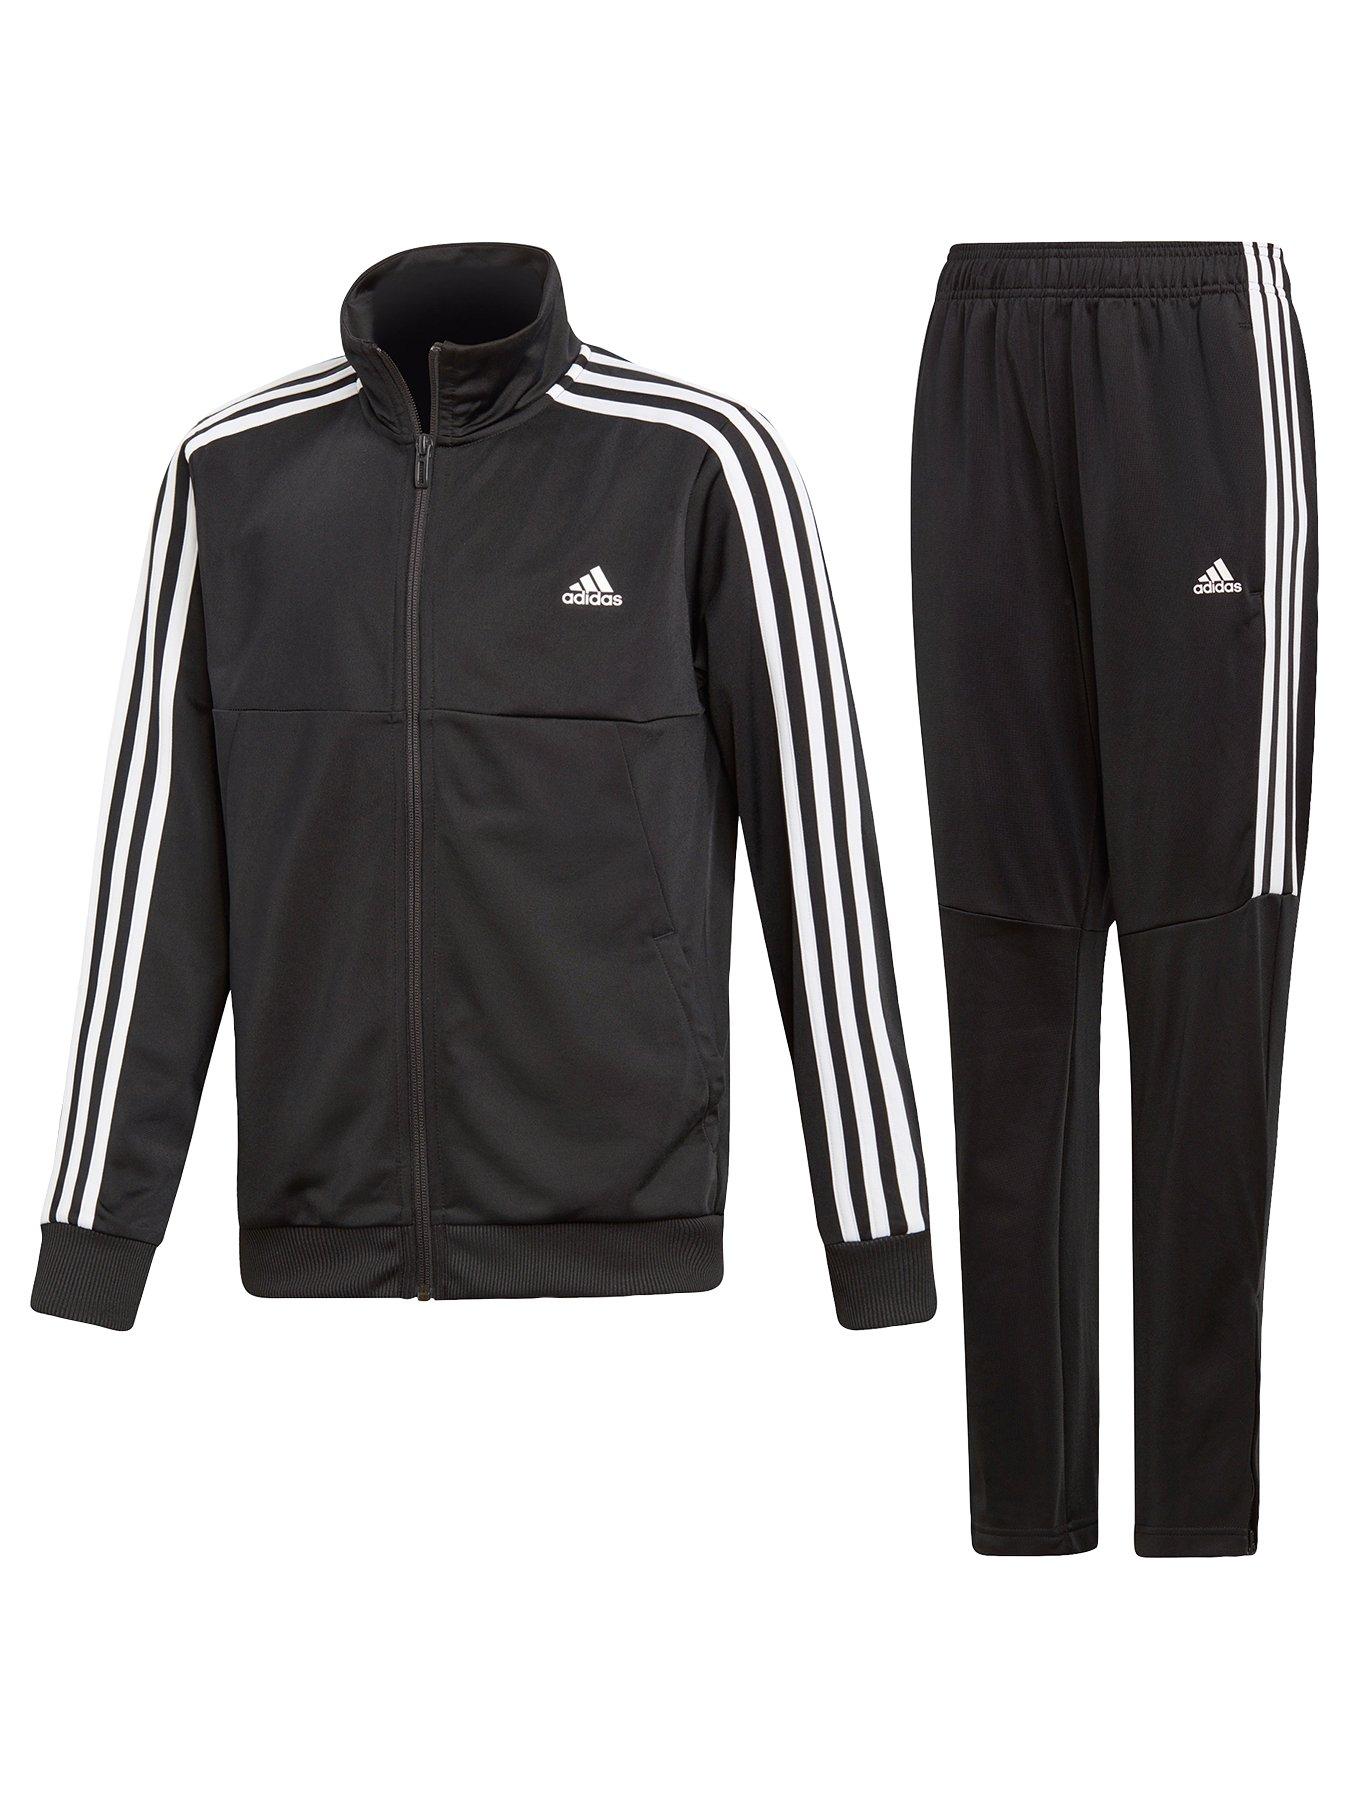 cheap childrens adidas tracksuits